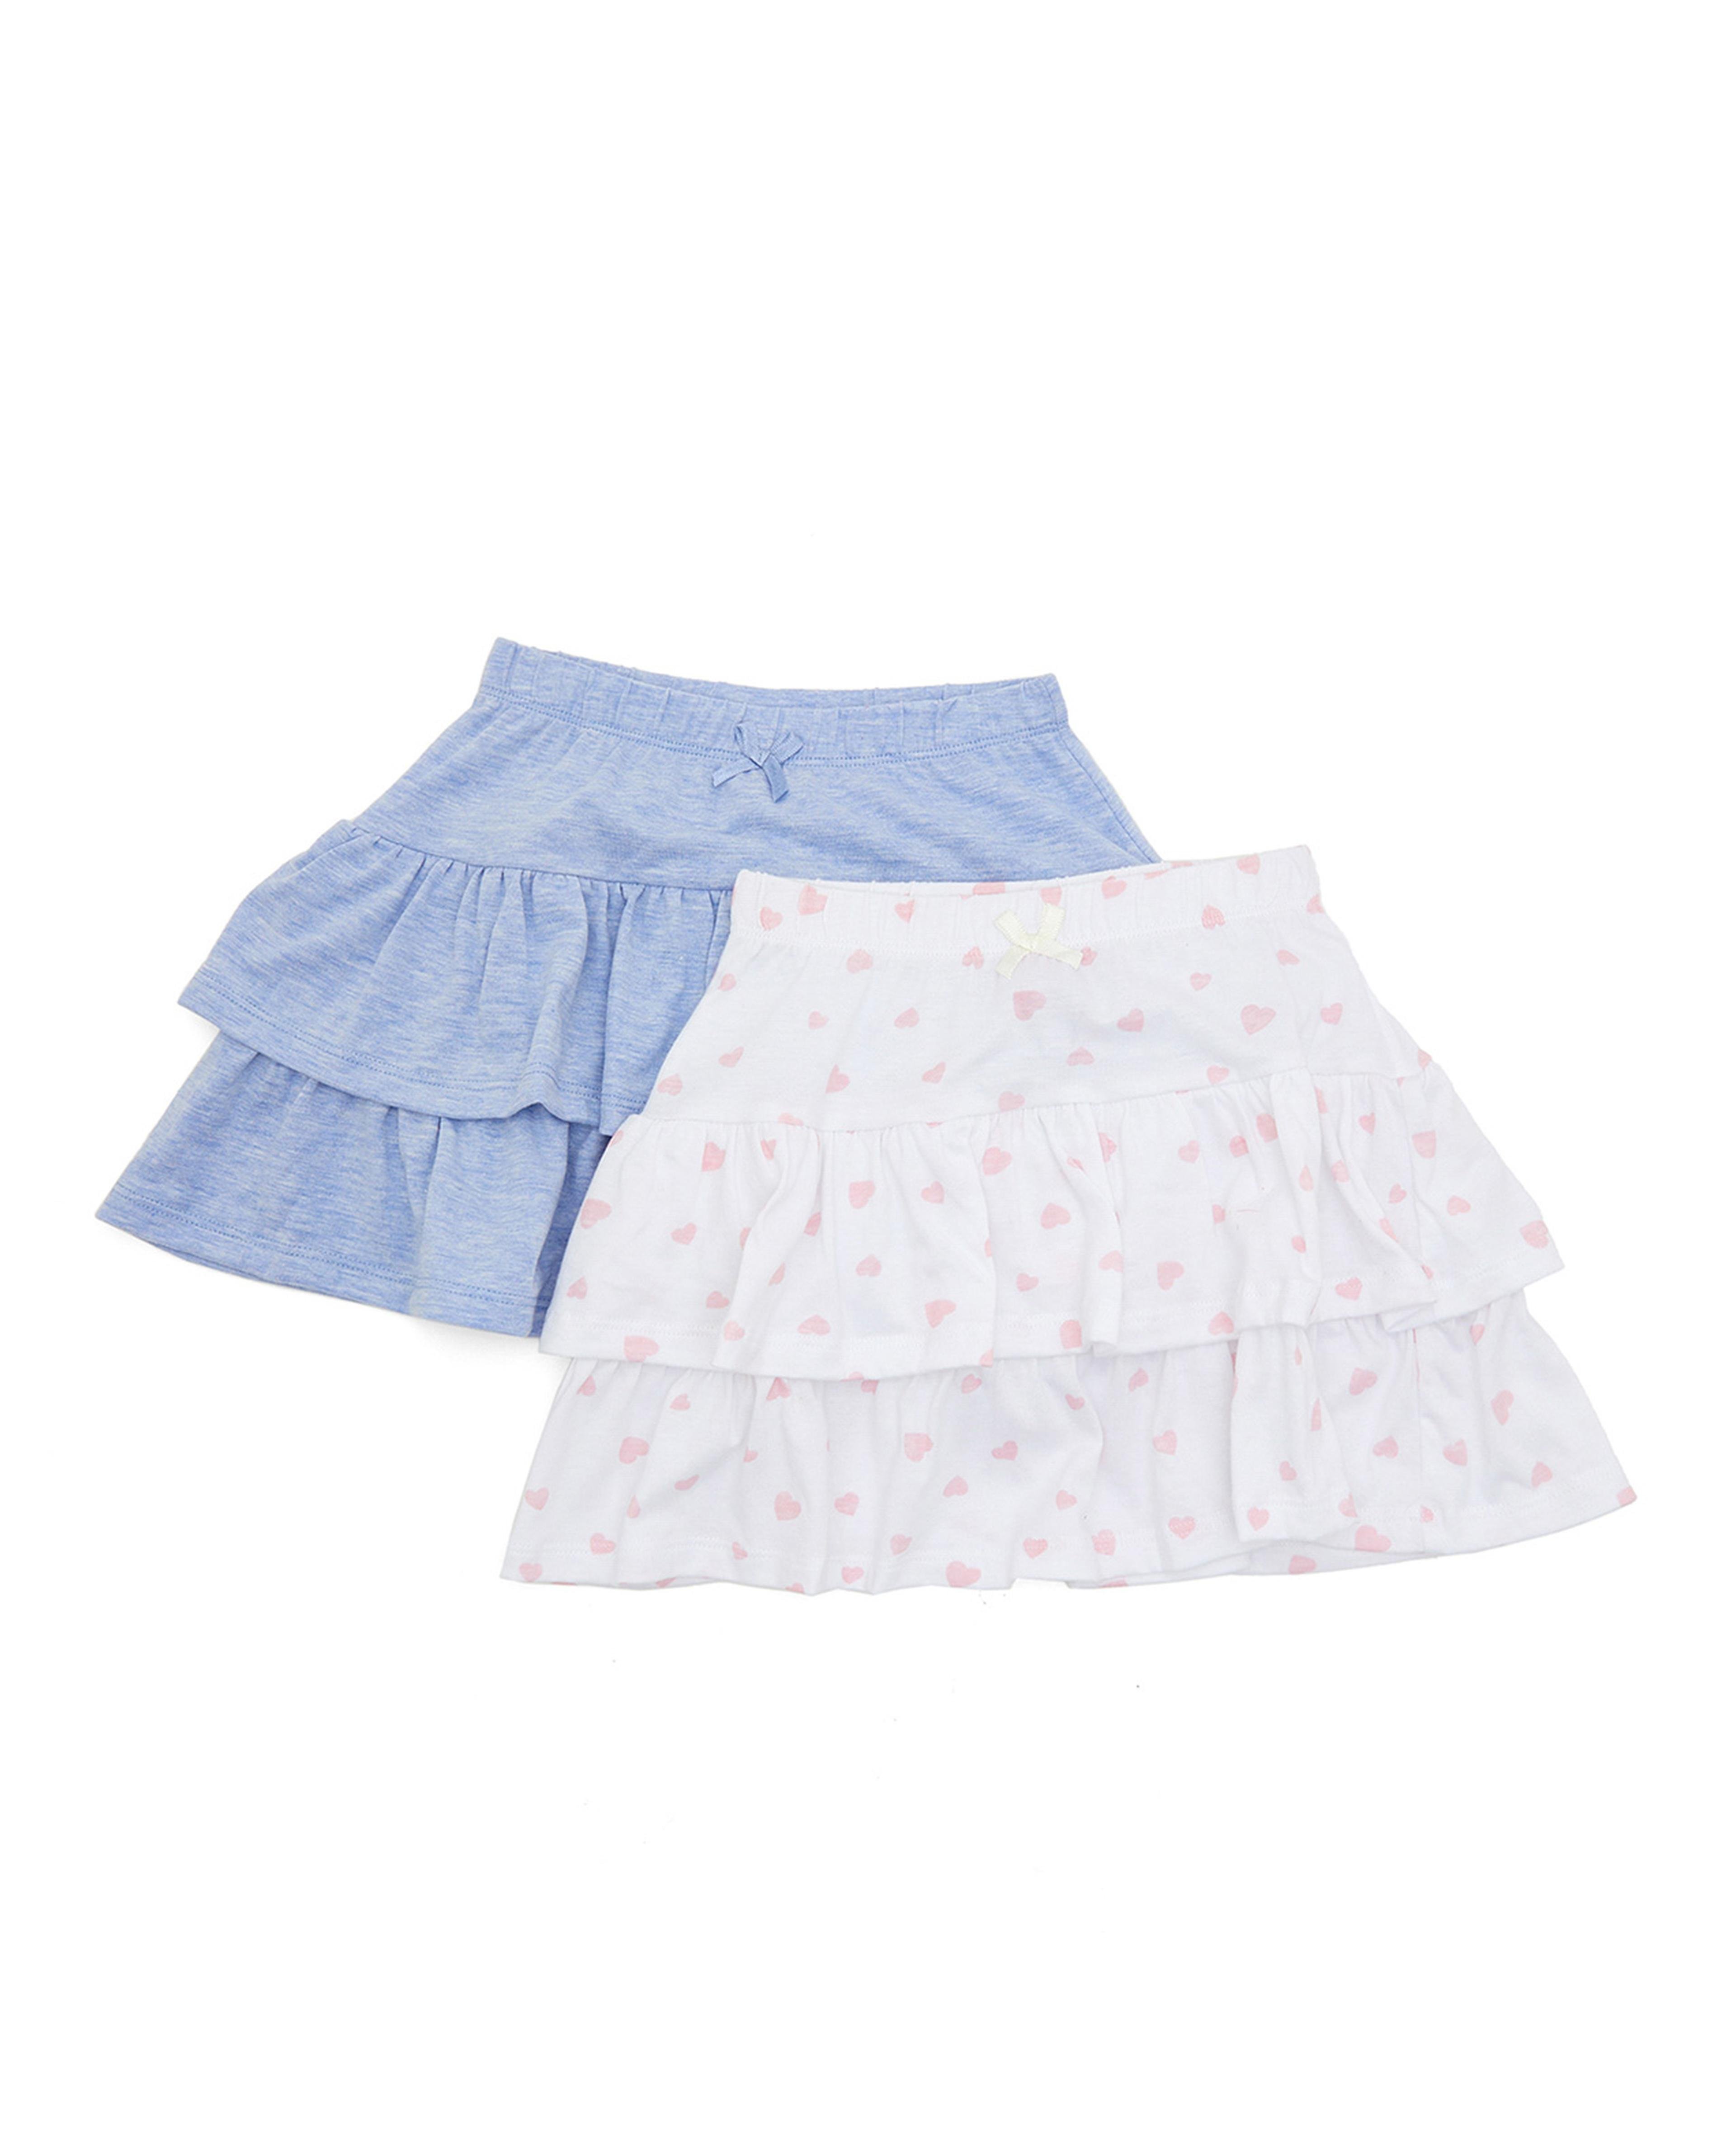 Pack of 2 Solid and Printed Mini Skirt